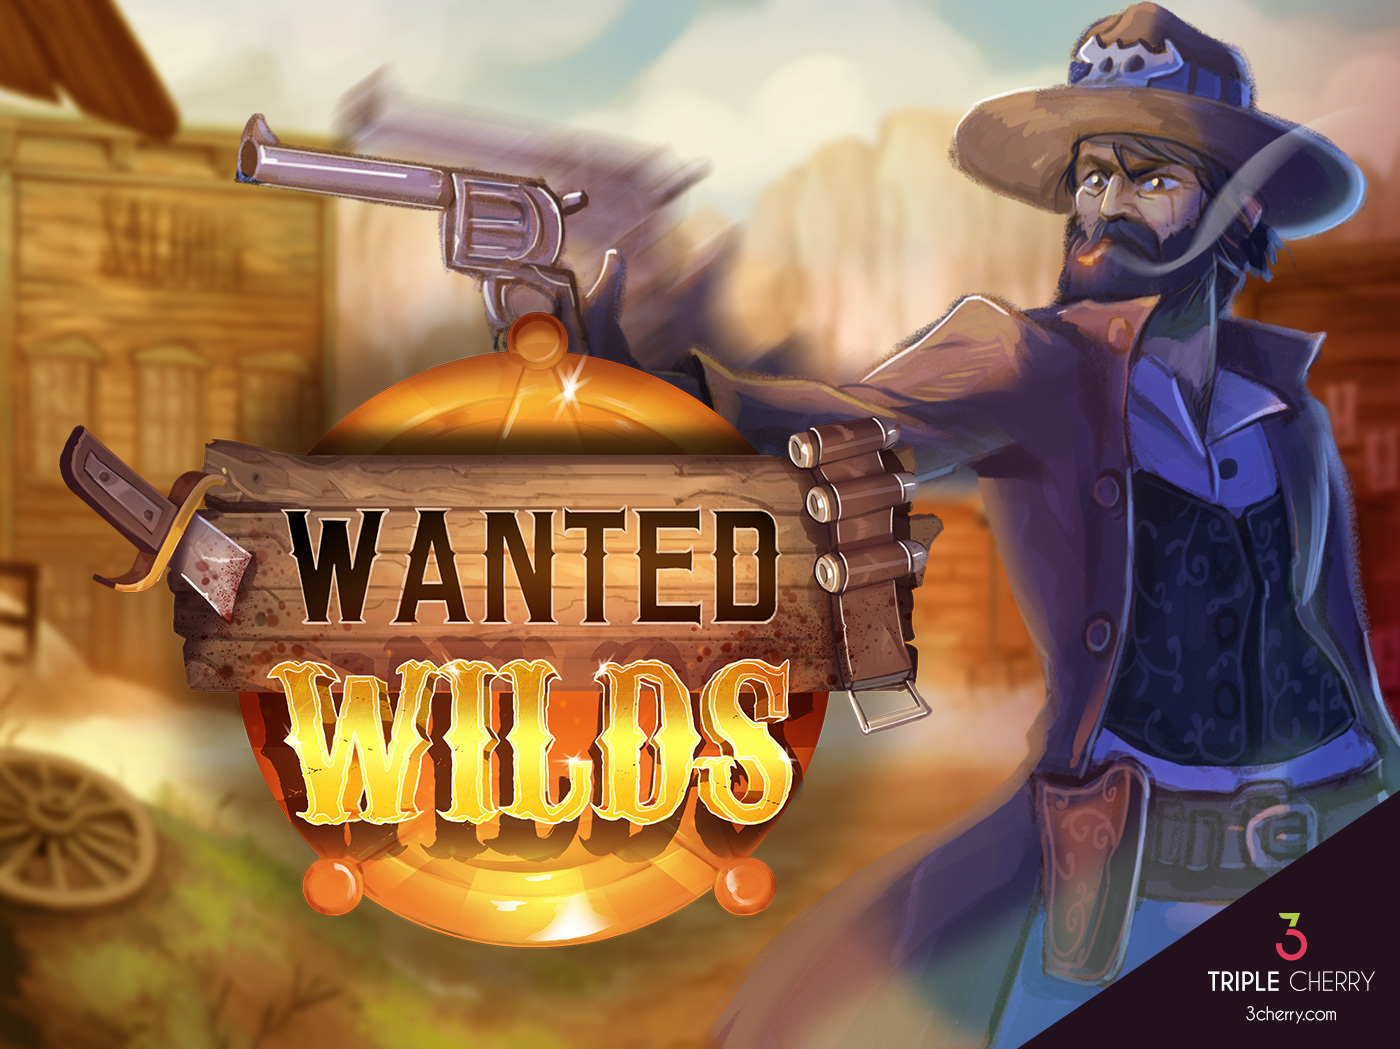 Wanted Wilds